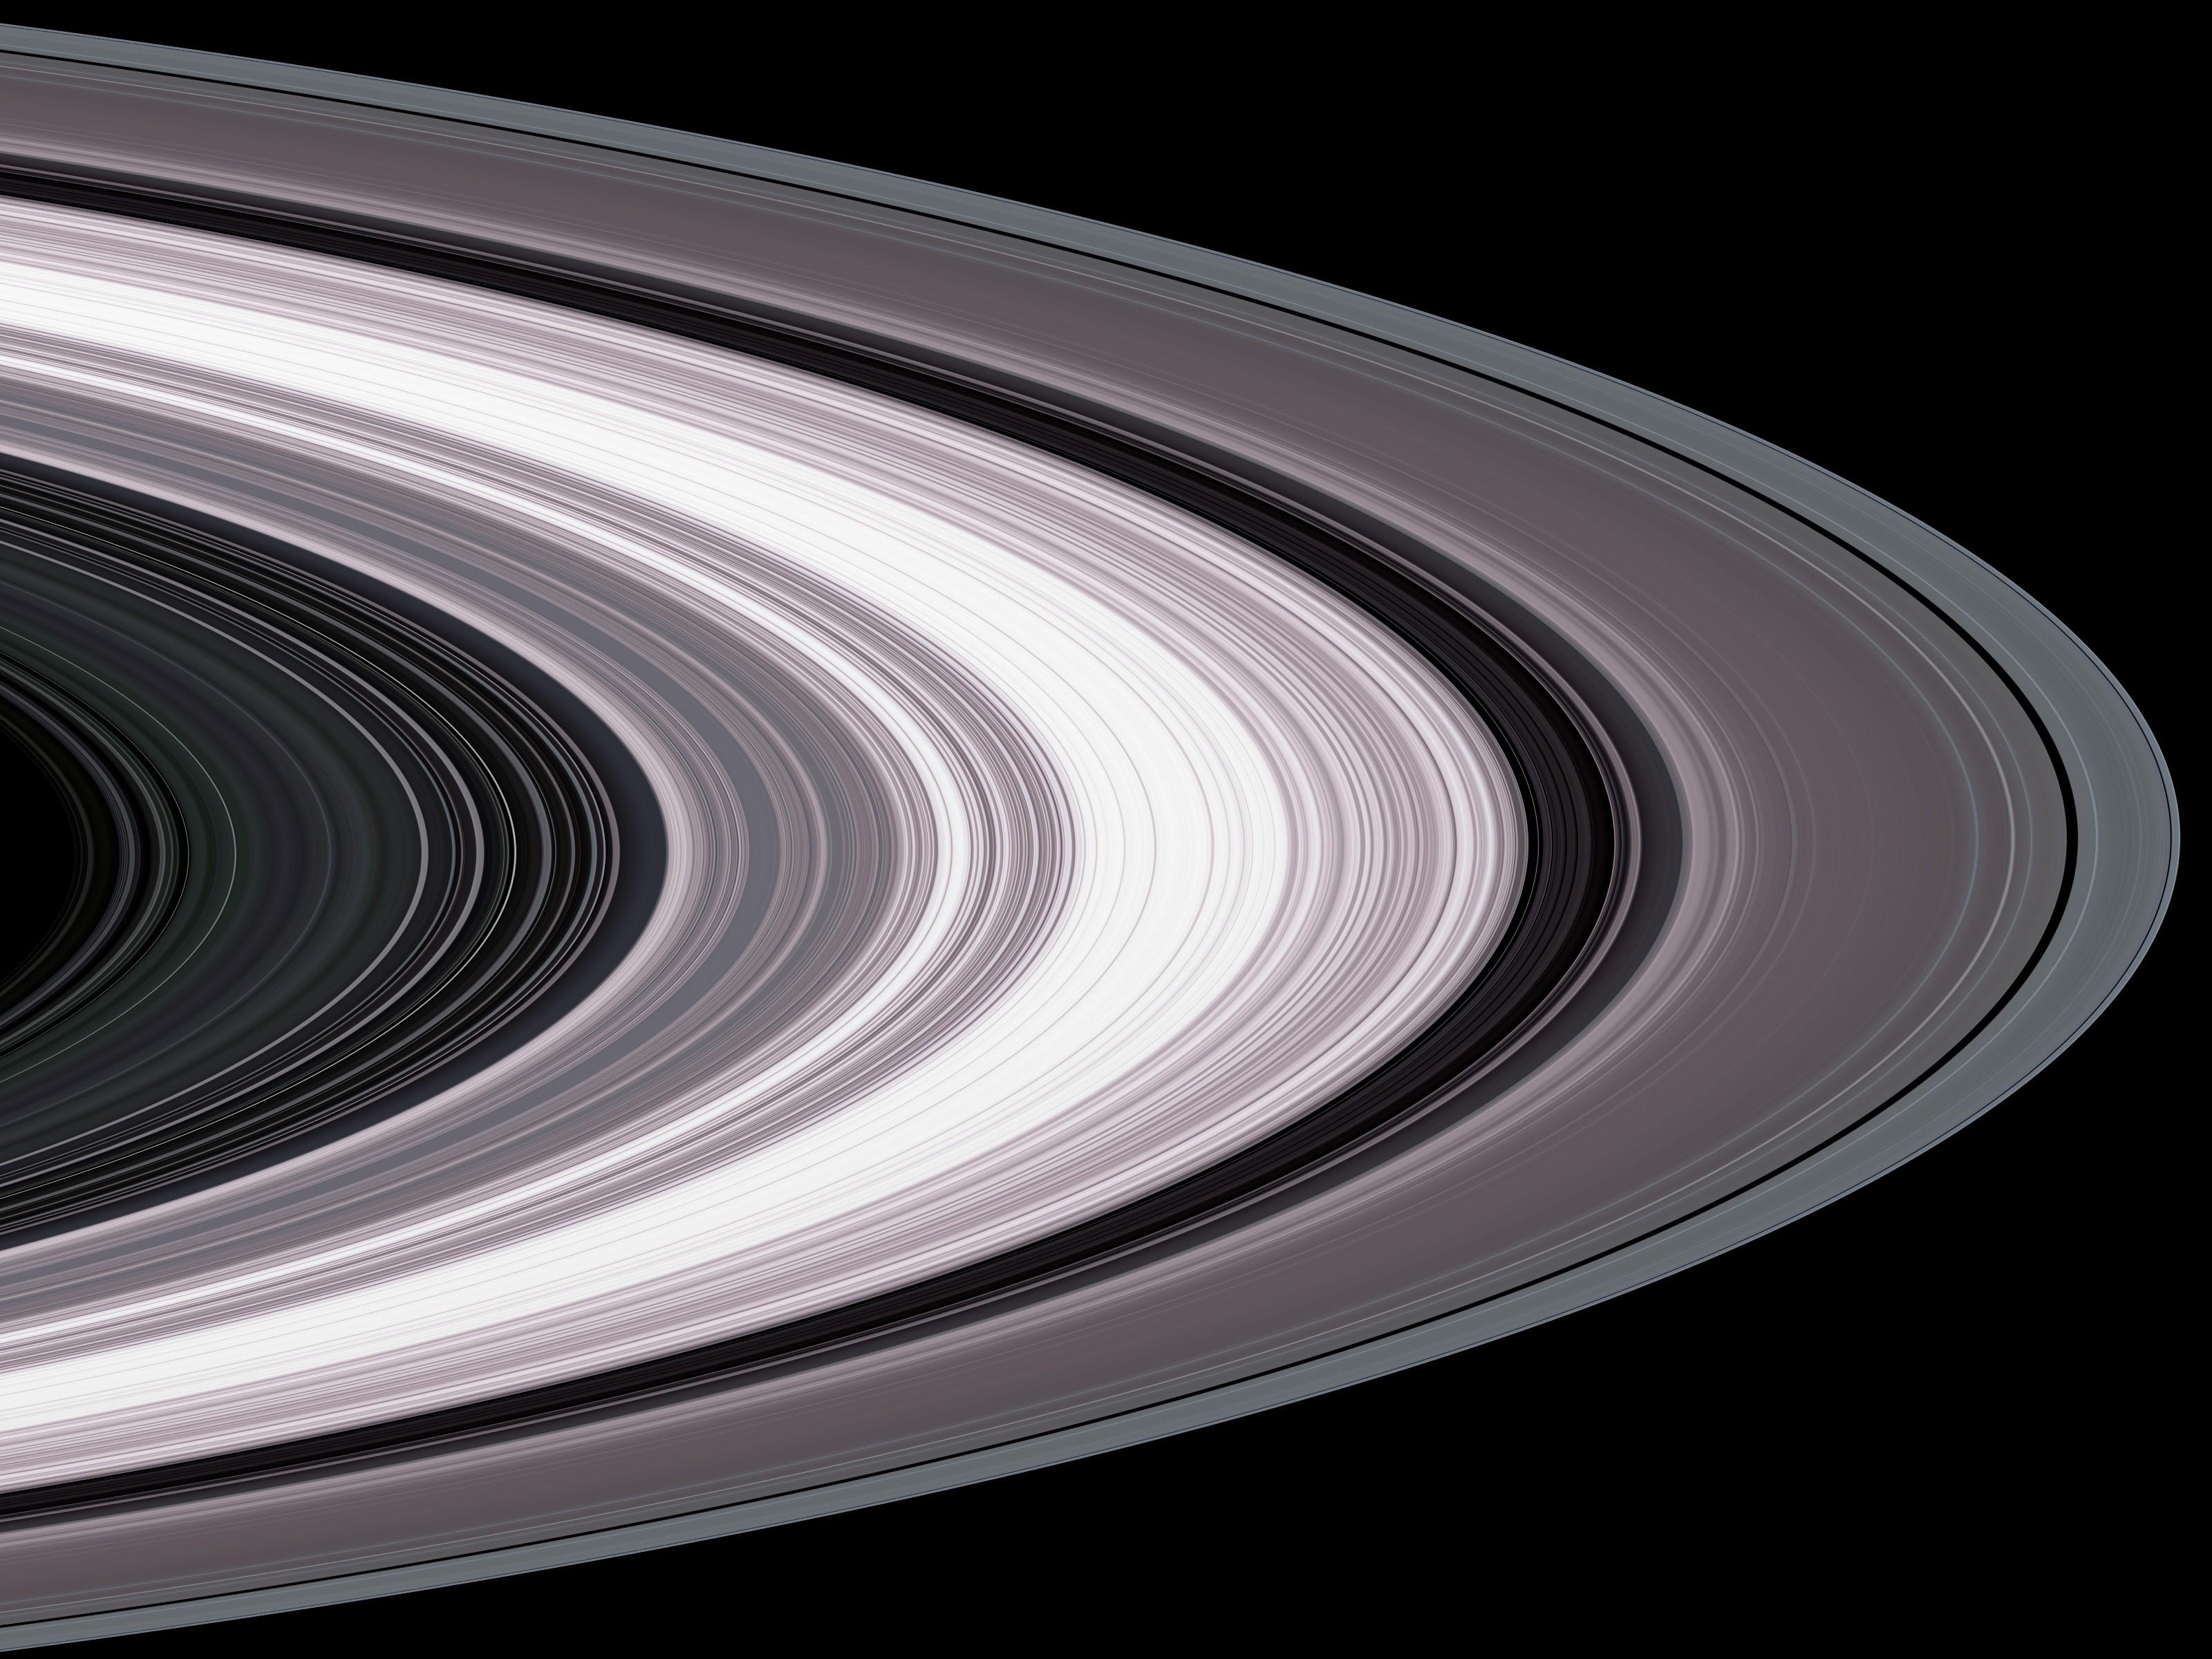 Saturn's rings and moons, Cassini image - Stock Image - C010/4065 - Science  Photo Library